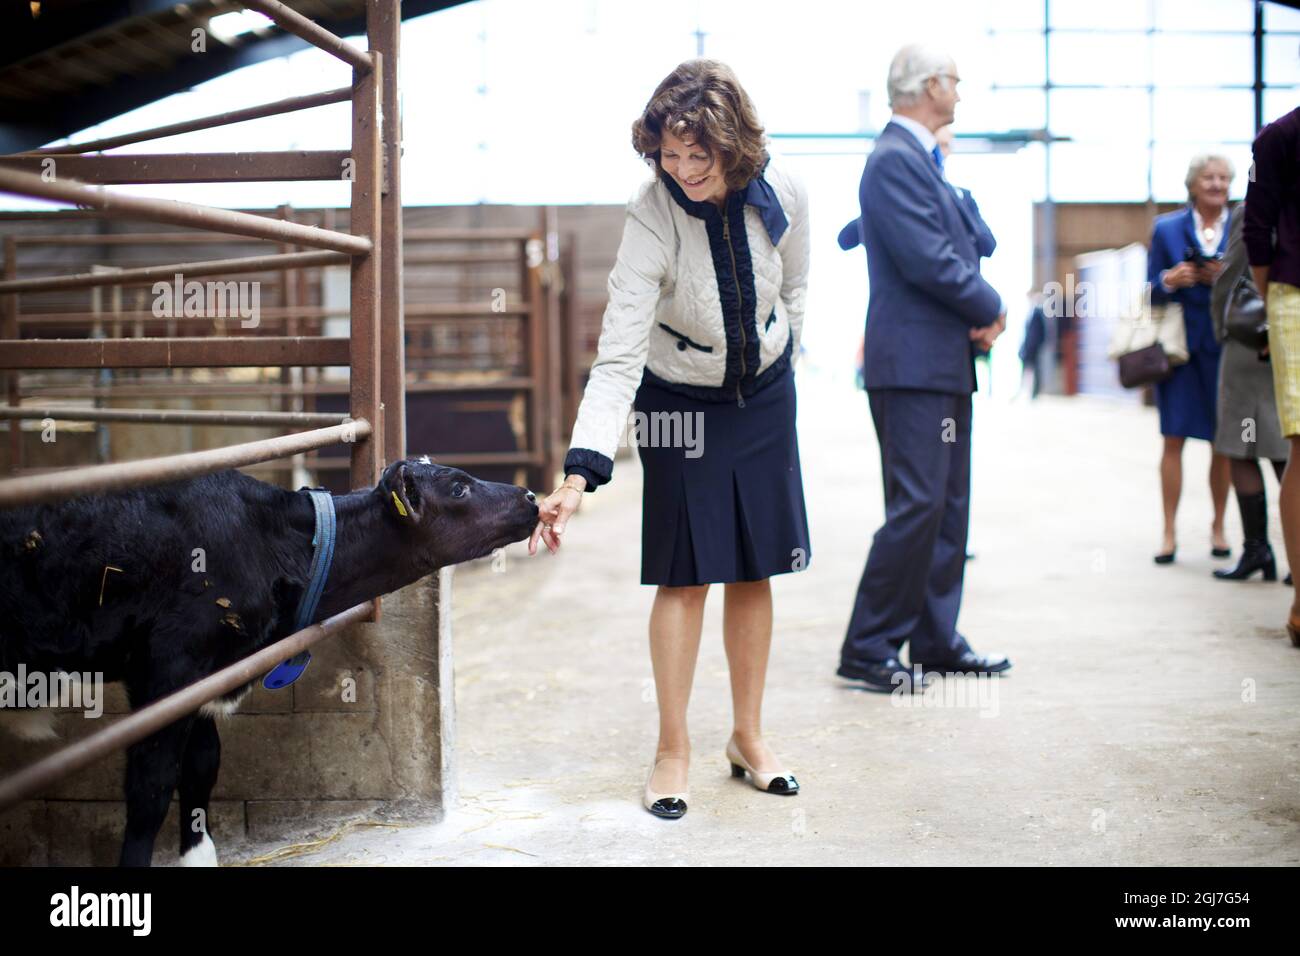 HALMSTAD 20120904. Queen Silvia gets acquainted with a calf under the supervision of King Carl Gustaf during a visit to a farming estate near Halmstad, Sweden, September 4, 2012 .The Royals are on a one day visit to the county of Halland. Foto: Anders Andersson/SCANPIX Kod 11091 Stock Photo